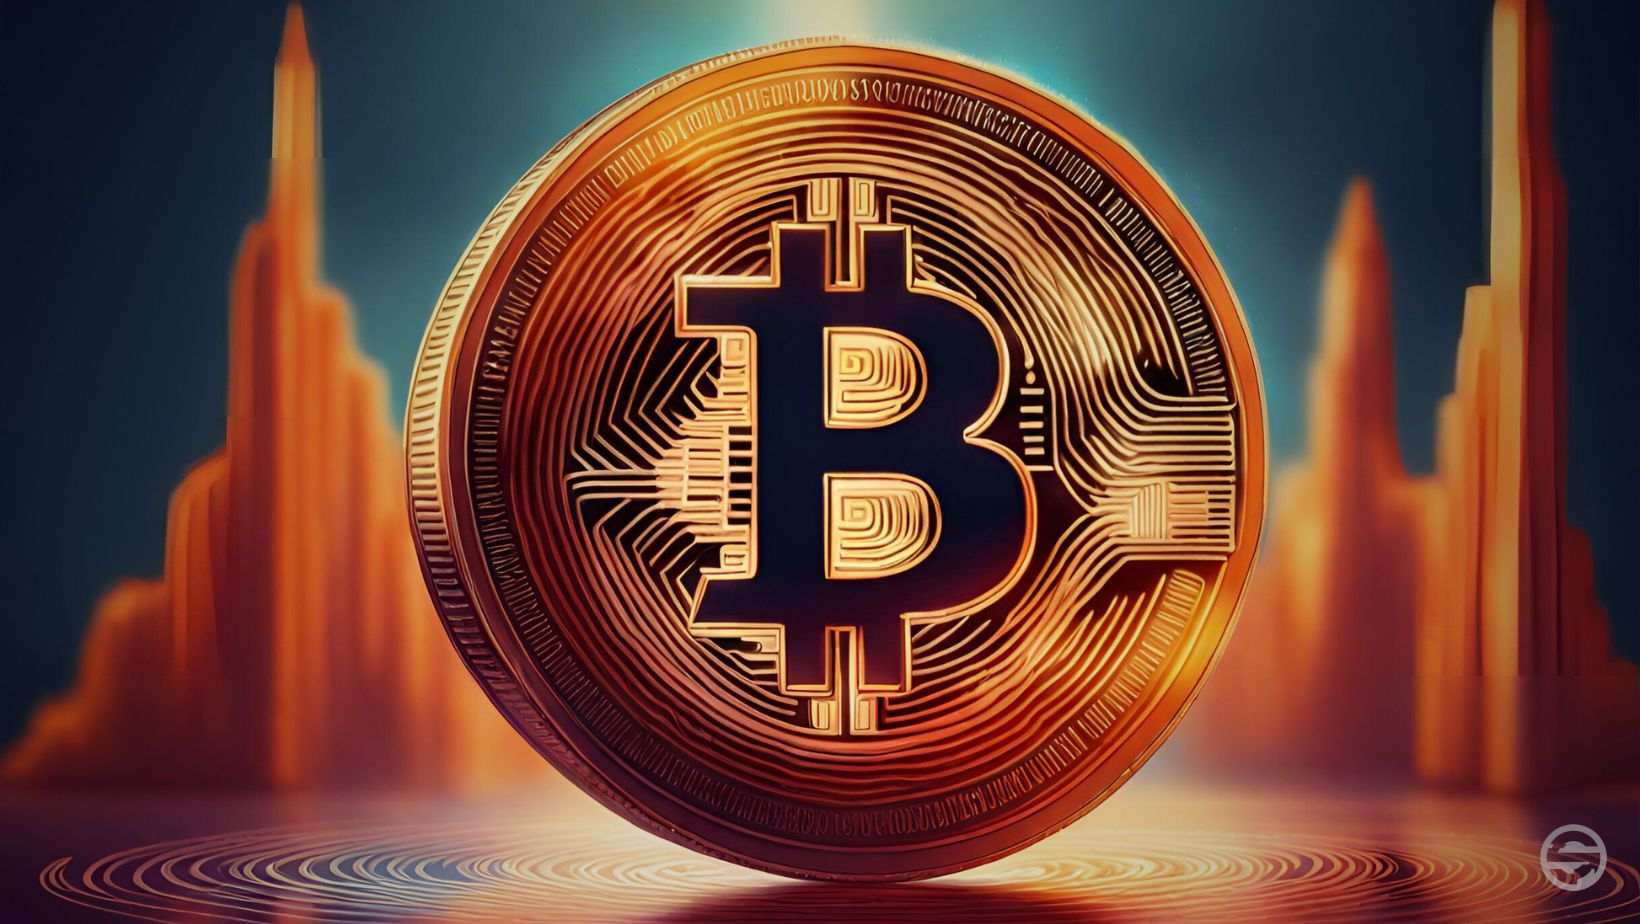 Bitcoin’s next halving is set for April 2024